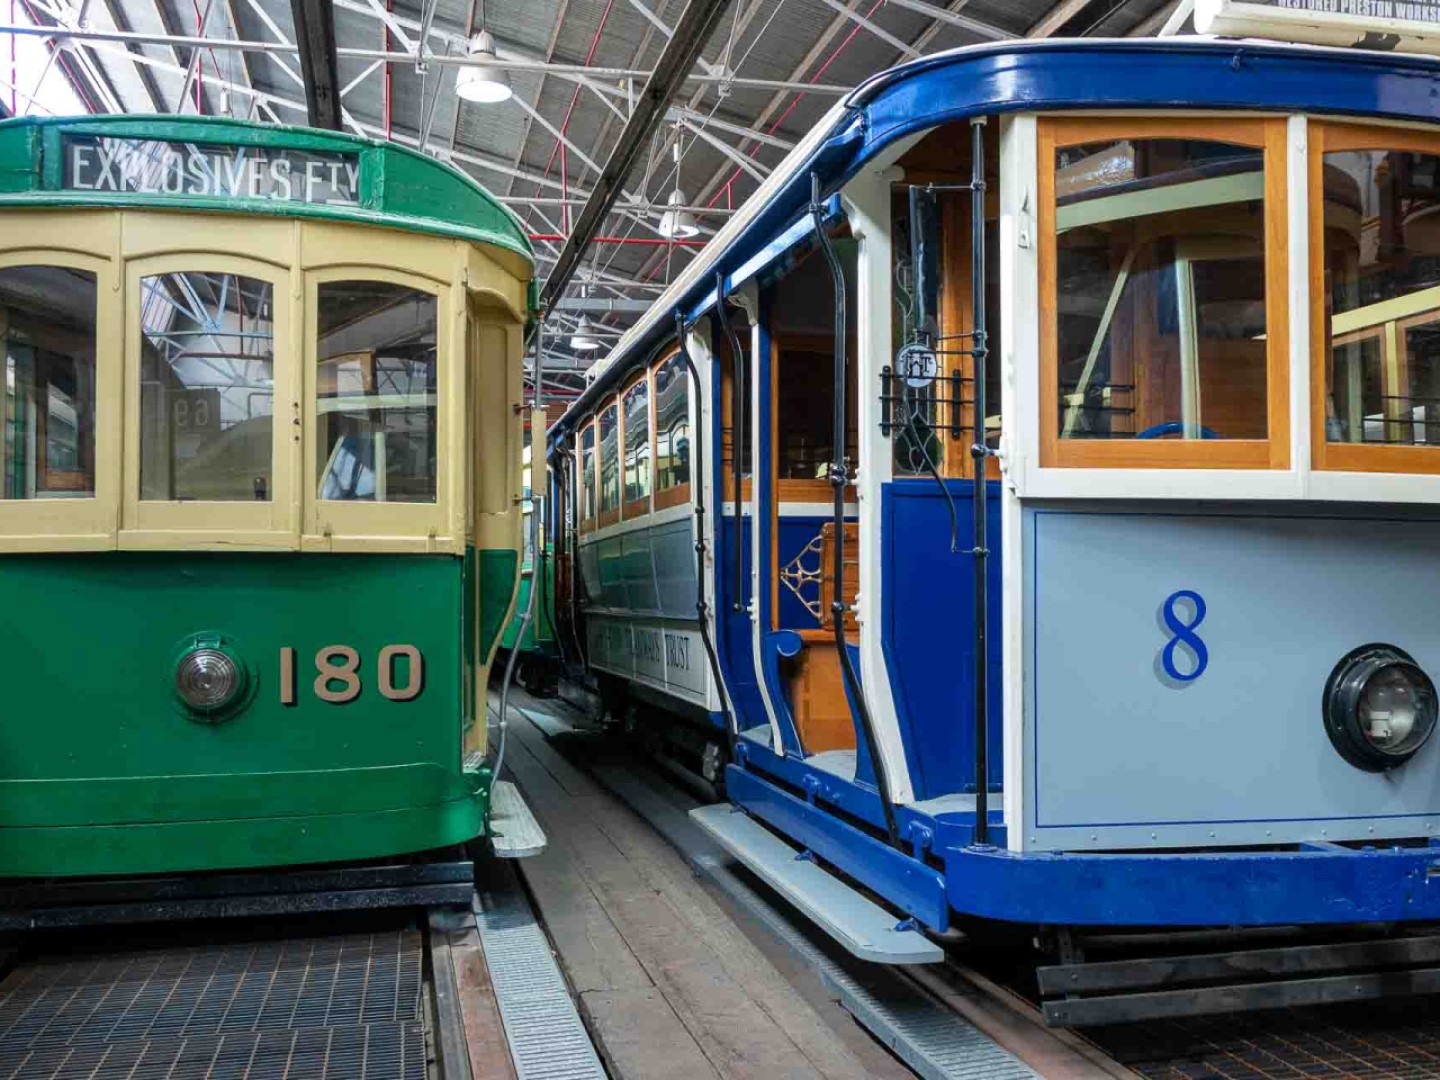 Two older style wooden trams with vintage paint, parked next to each other in a warehouse